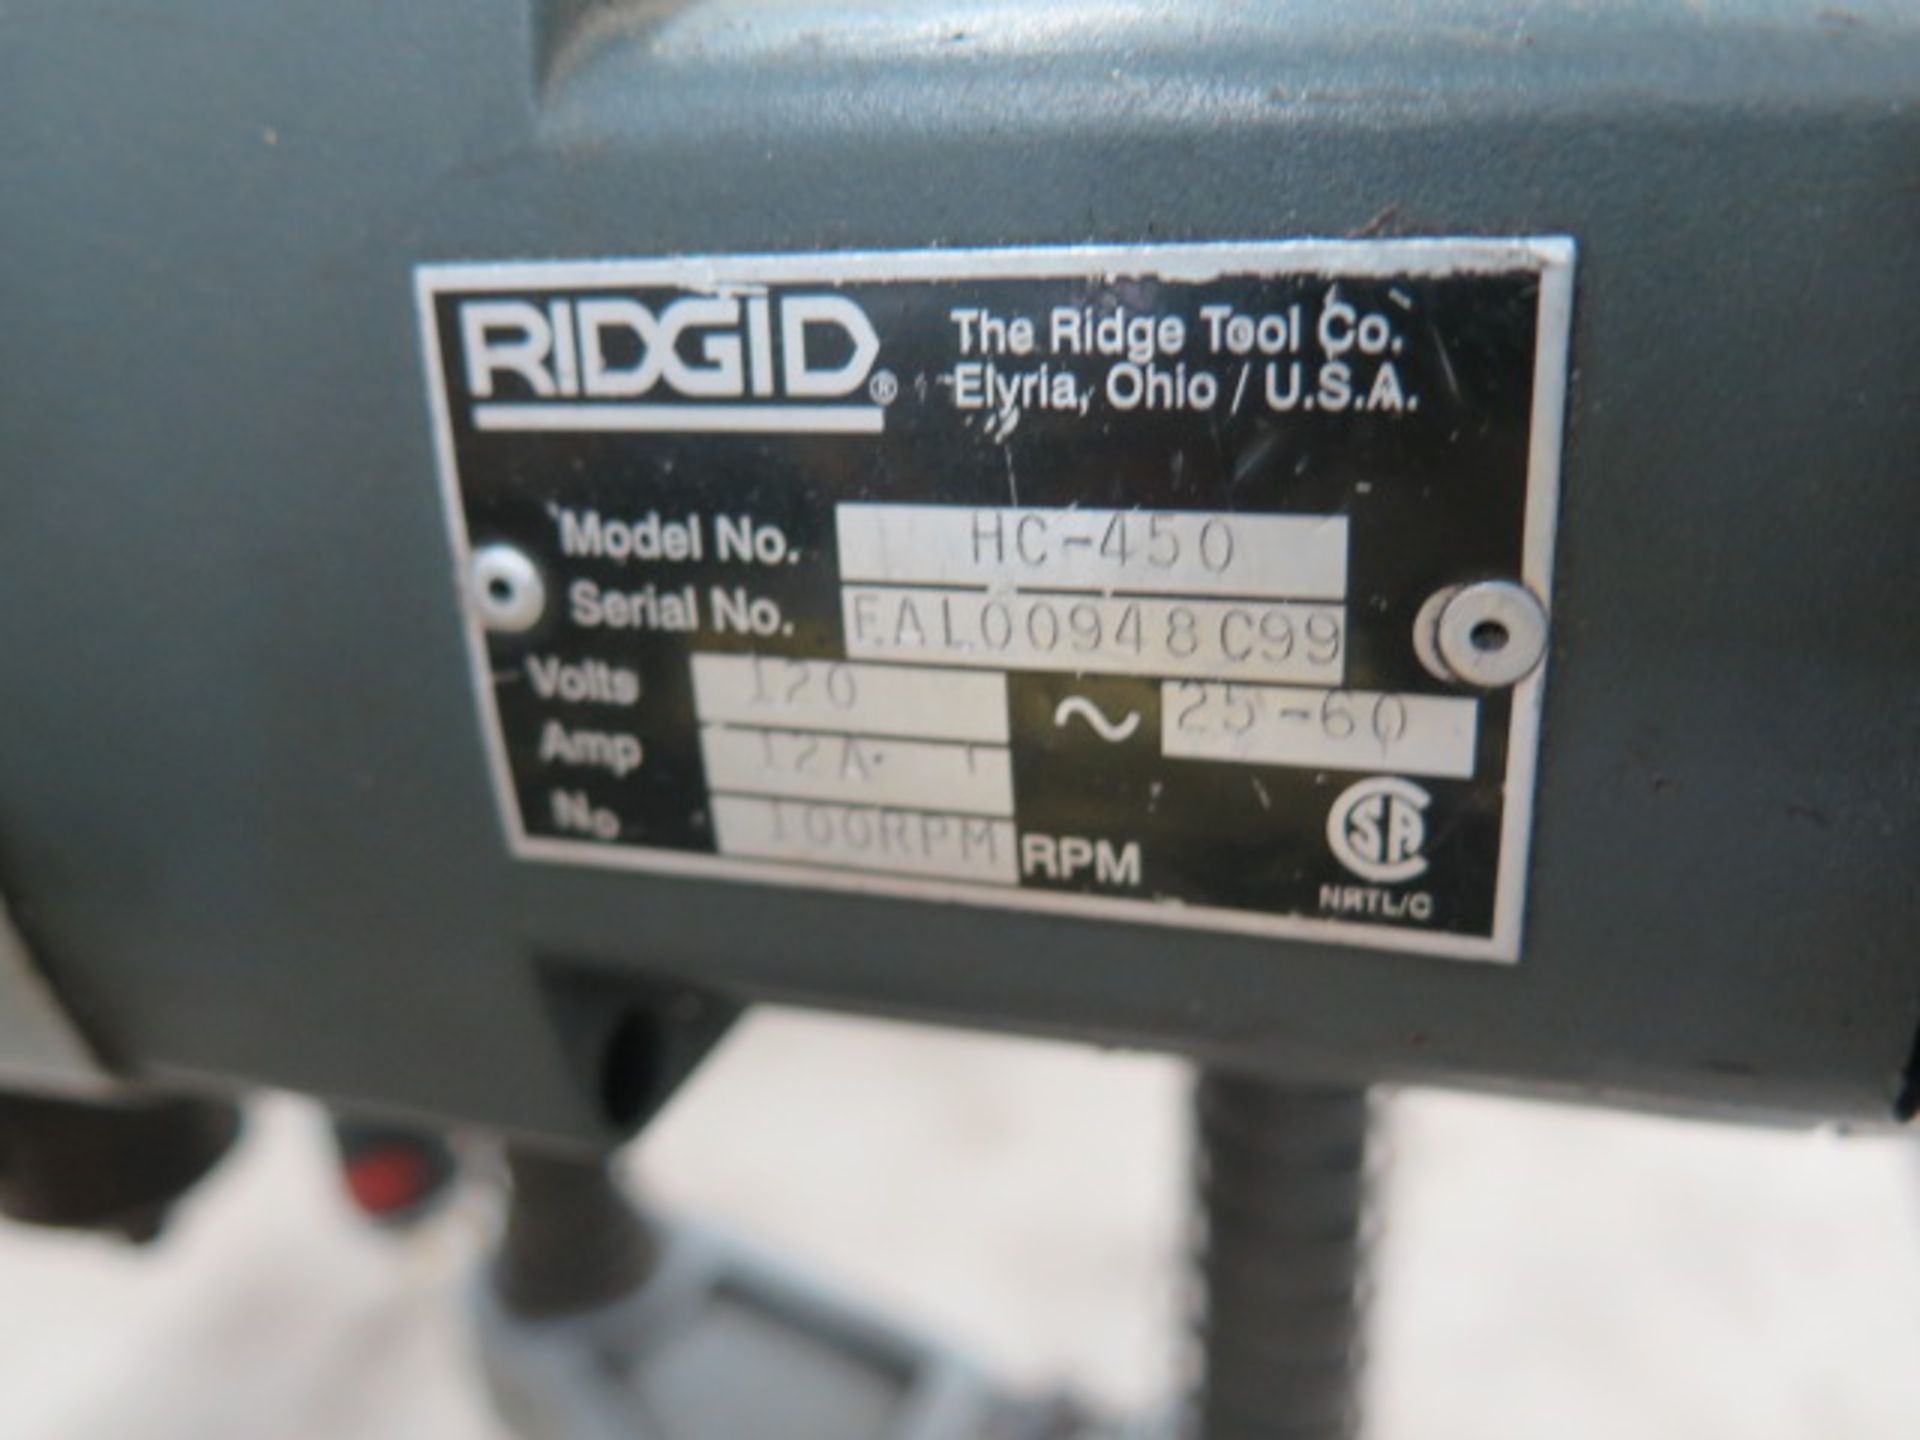 Rigid HC-450 Hole Cutting Machine (SOLD AS-IS - NO WARRANTY) - Image 5 of 8